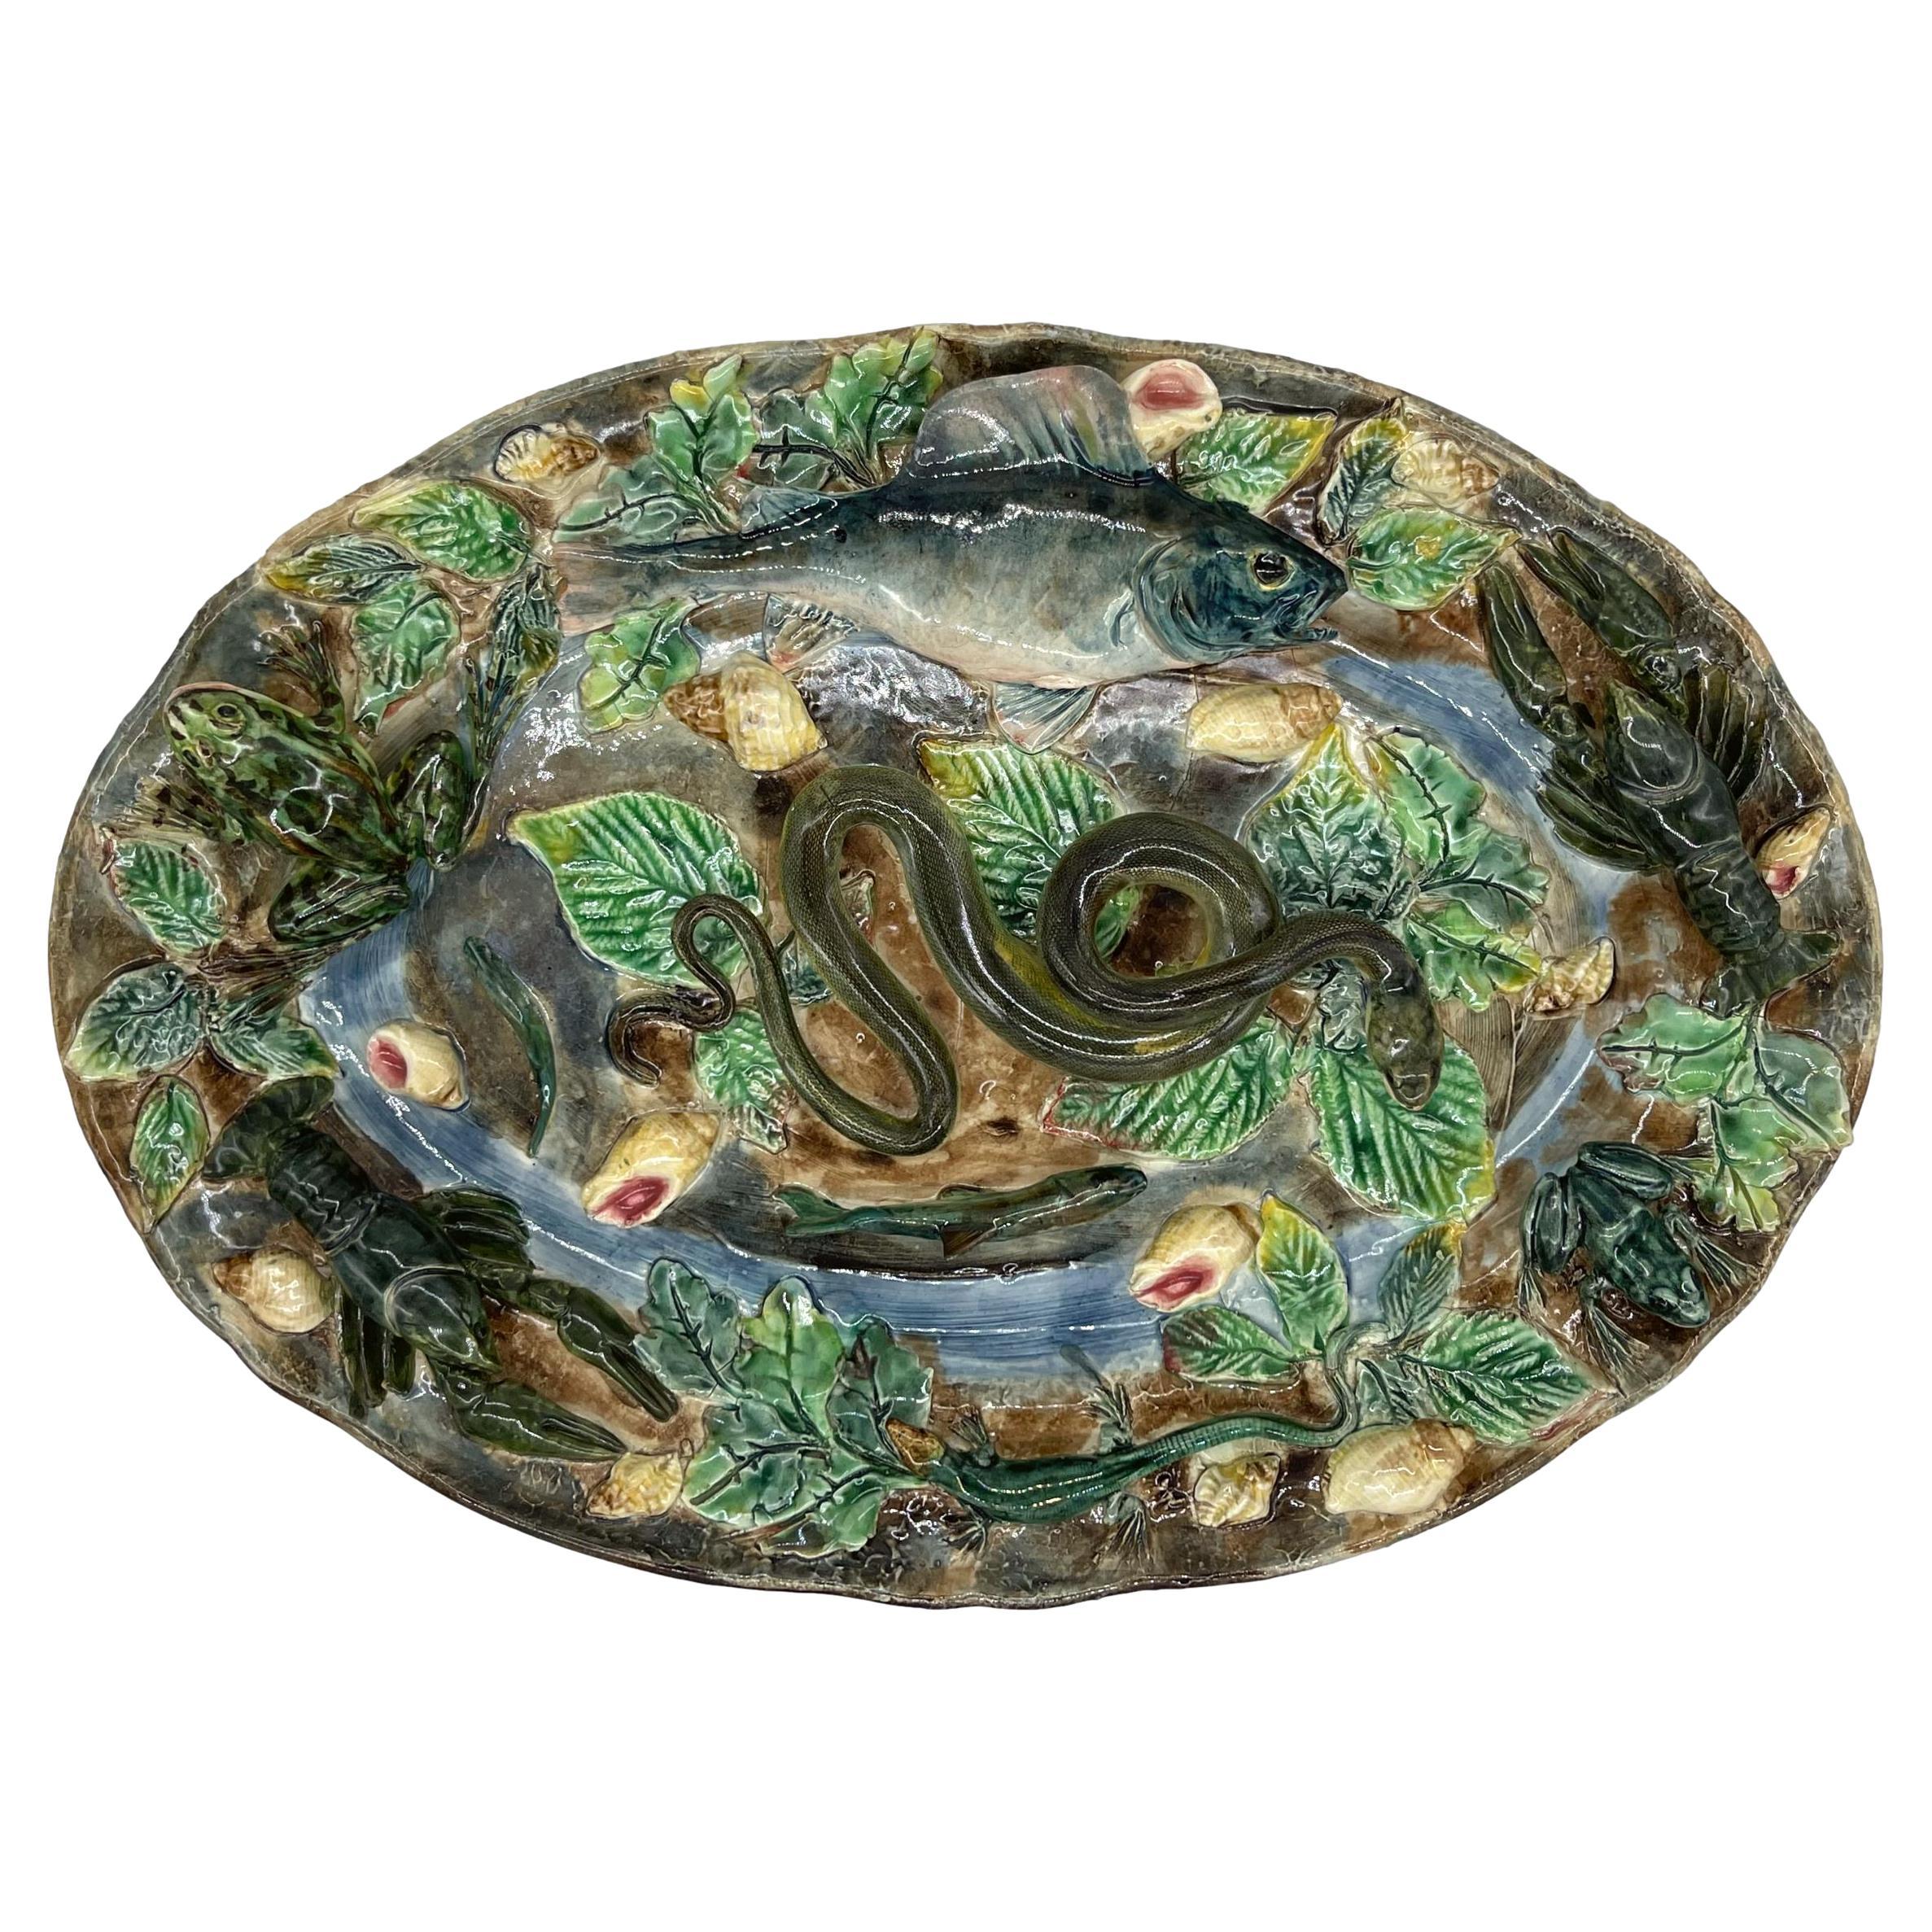 Palissy Ware Trompe L'oeil Oval Platter, Signed Longchamp, French, ca. 1875 For Sale